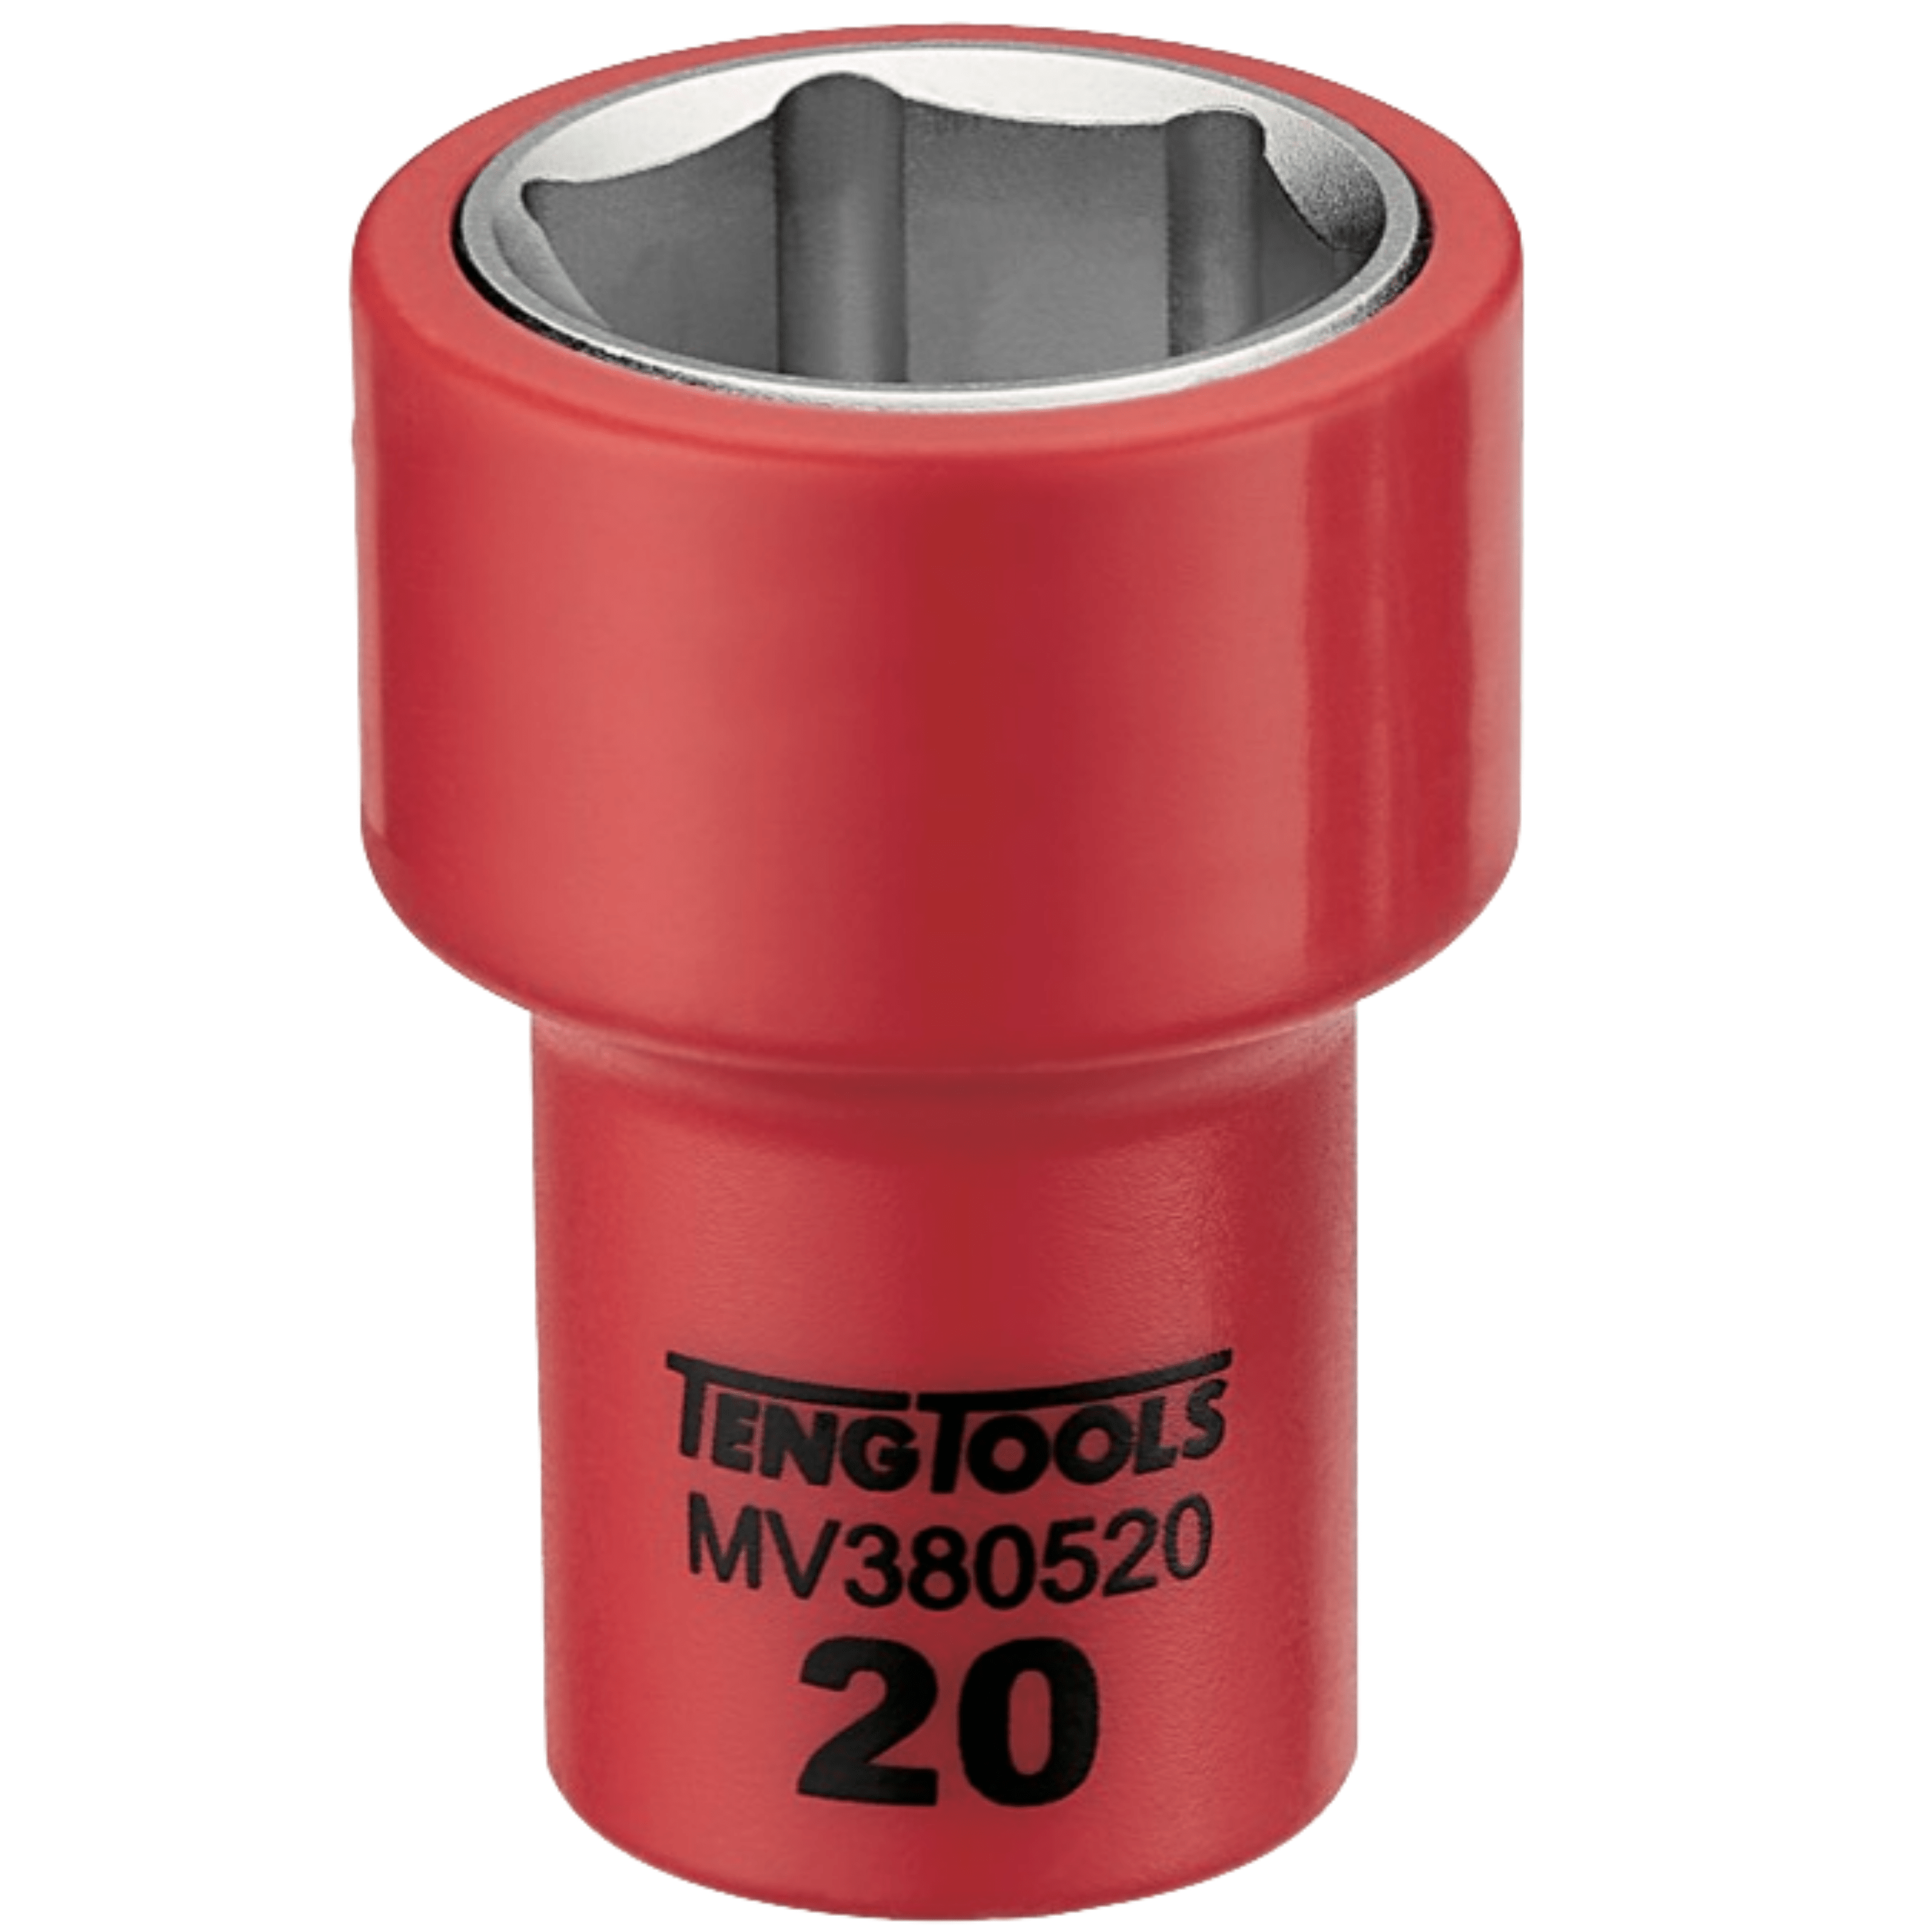 Teng Tools 3/8 Inch Drive Metric 6 Point 1000 Volt Shallow Insulated Sockets - 10mm